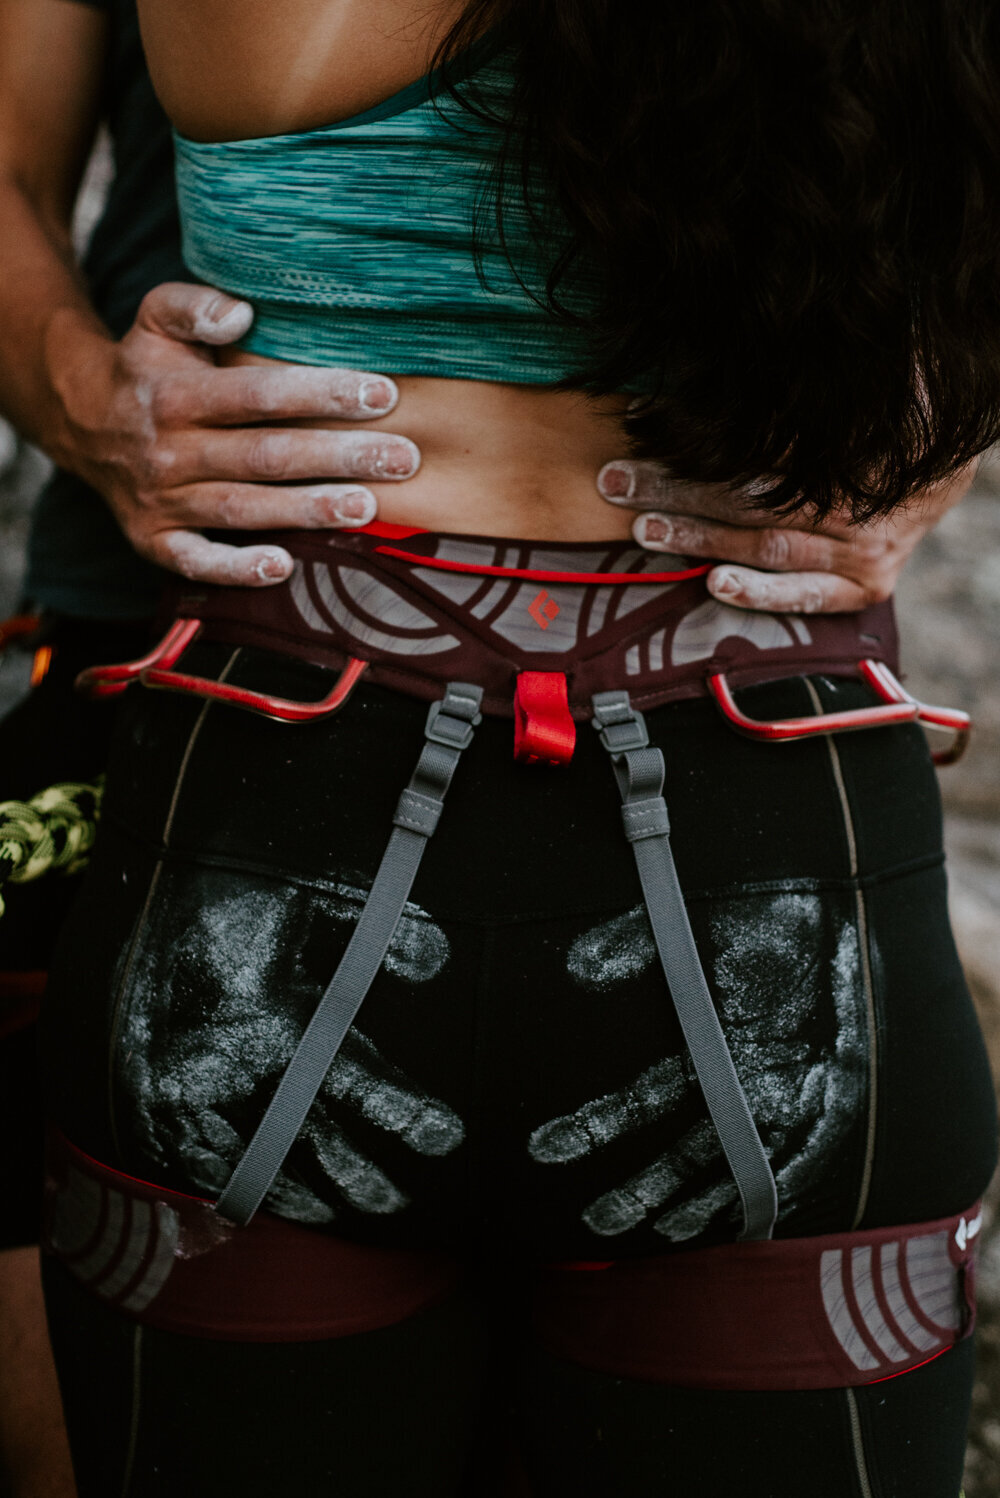 Detail shot of chalk hands on bum after climbing engagement session in Squamish